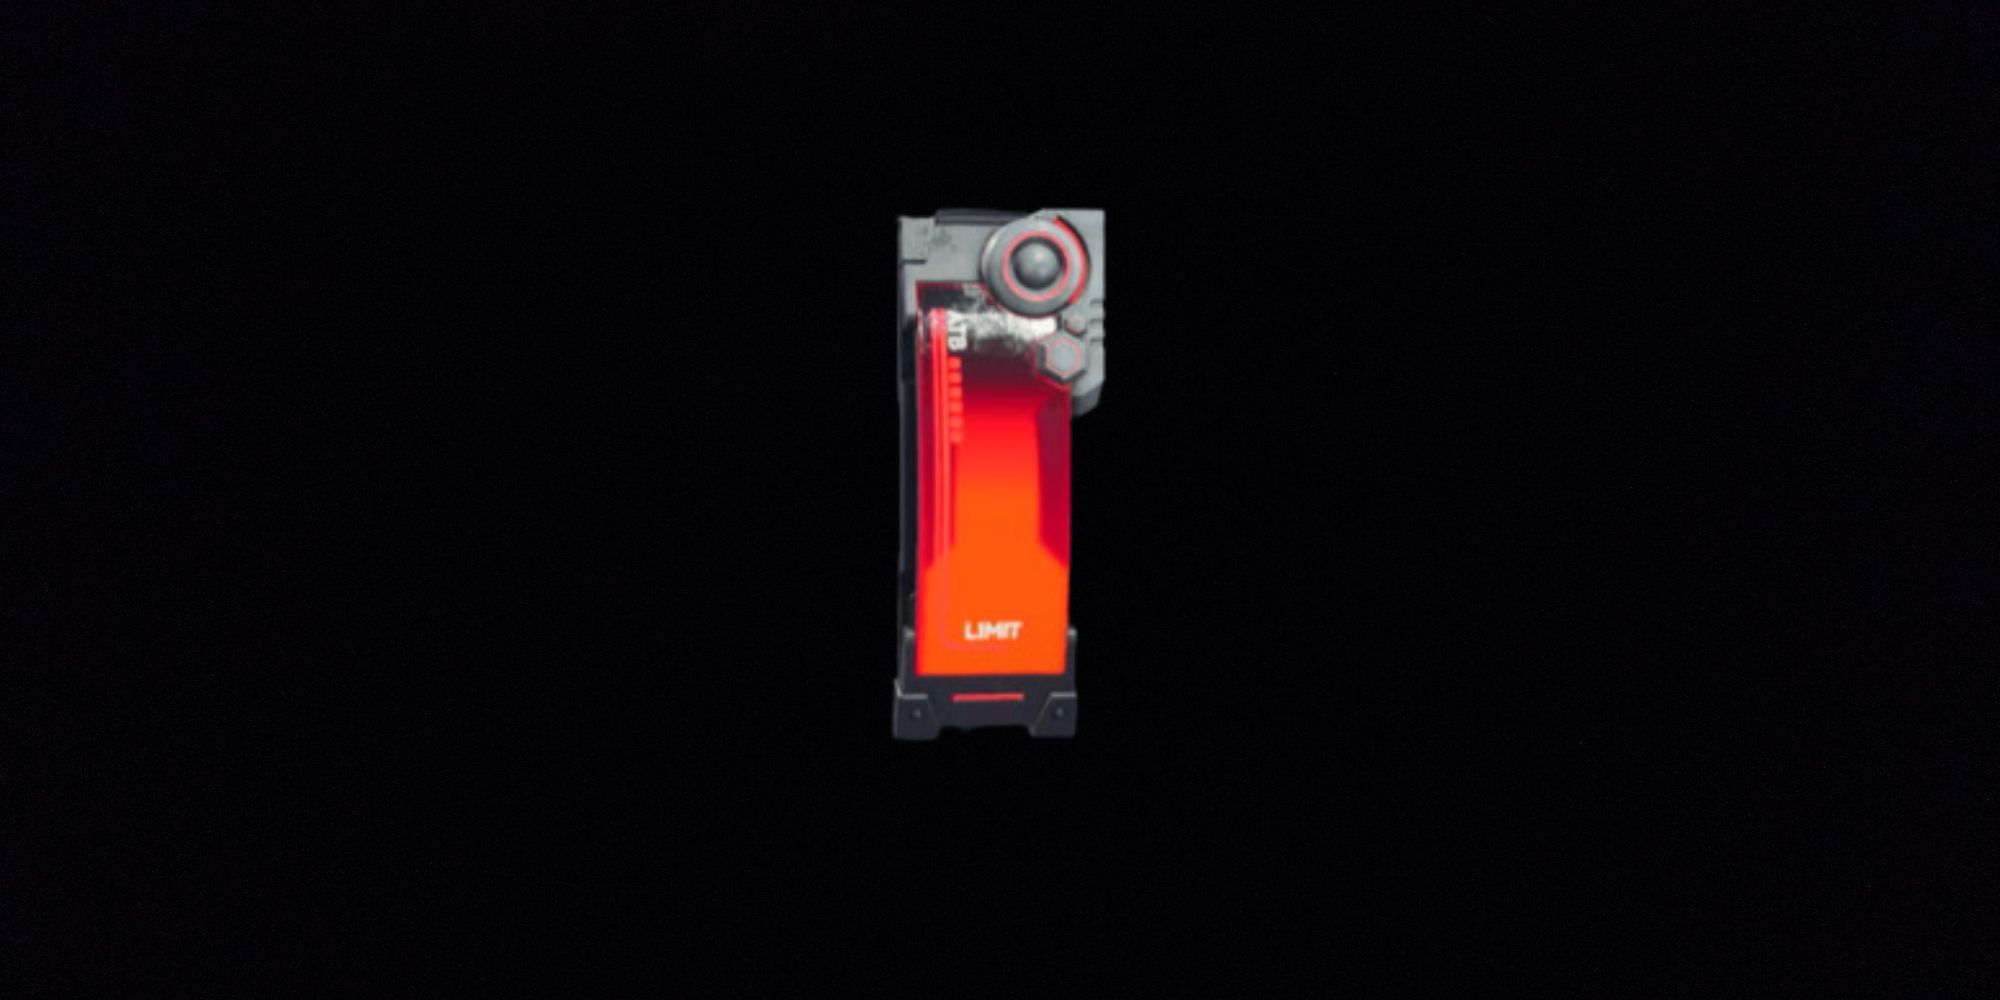 the limit booster accessory on a black background